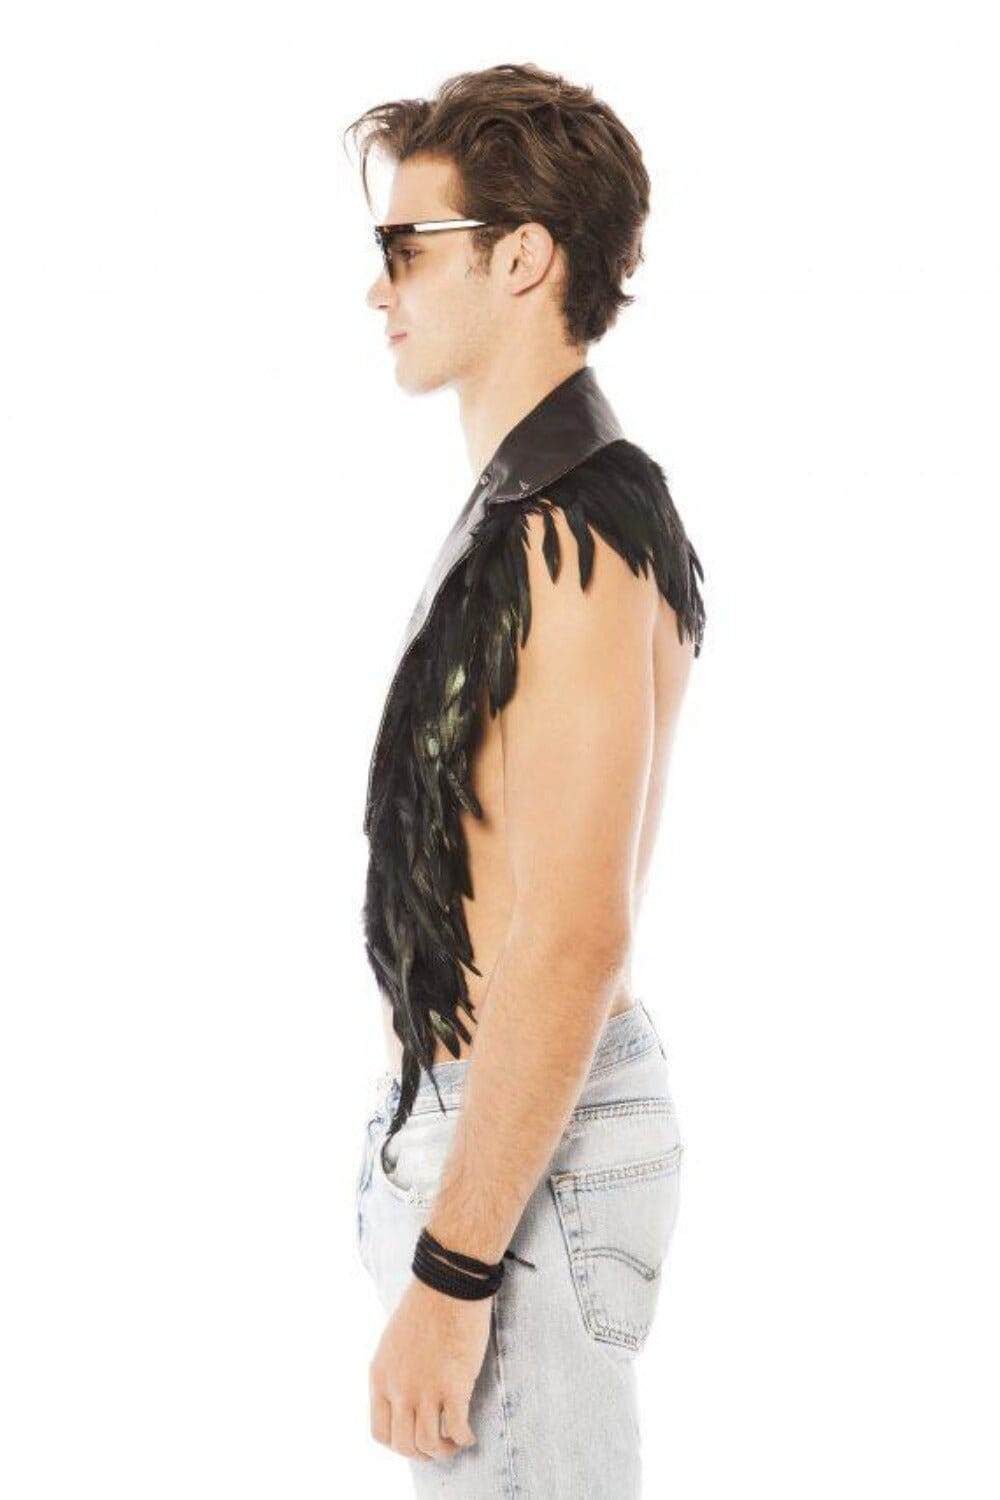 mens burning man style black leather mad max scarf with feathers by Love Khaos